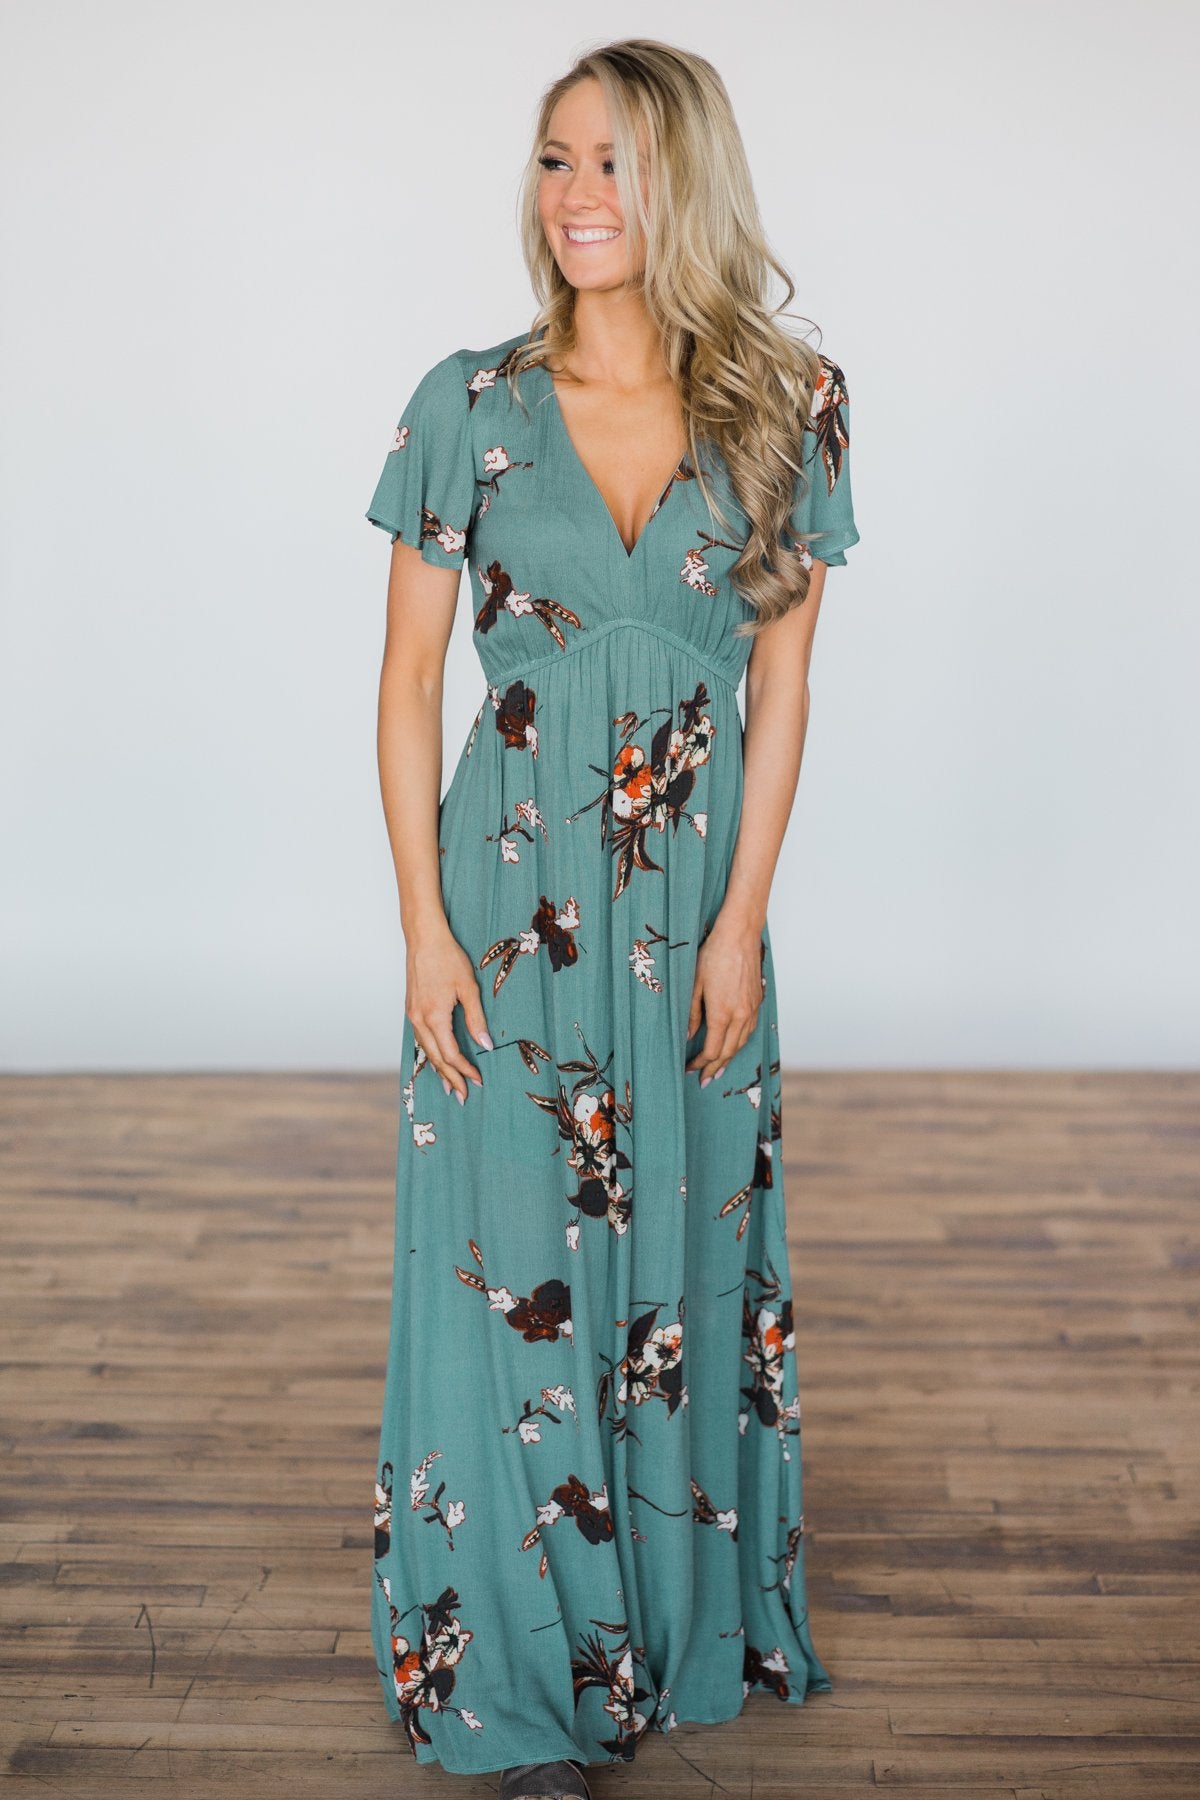 Dreaming of a New Day Floral Maxi Dress